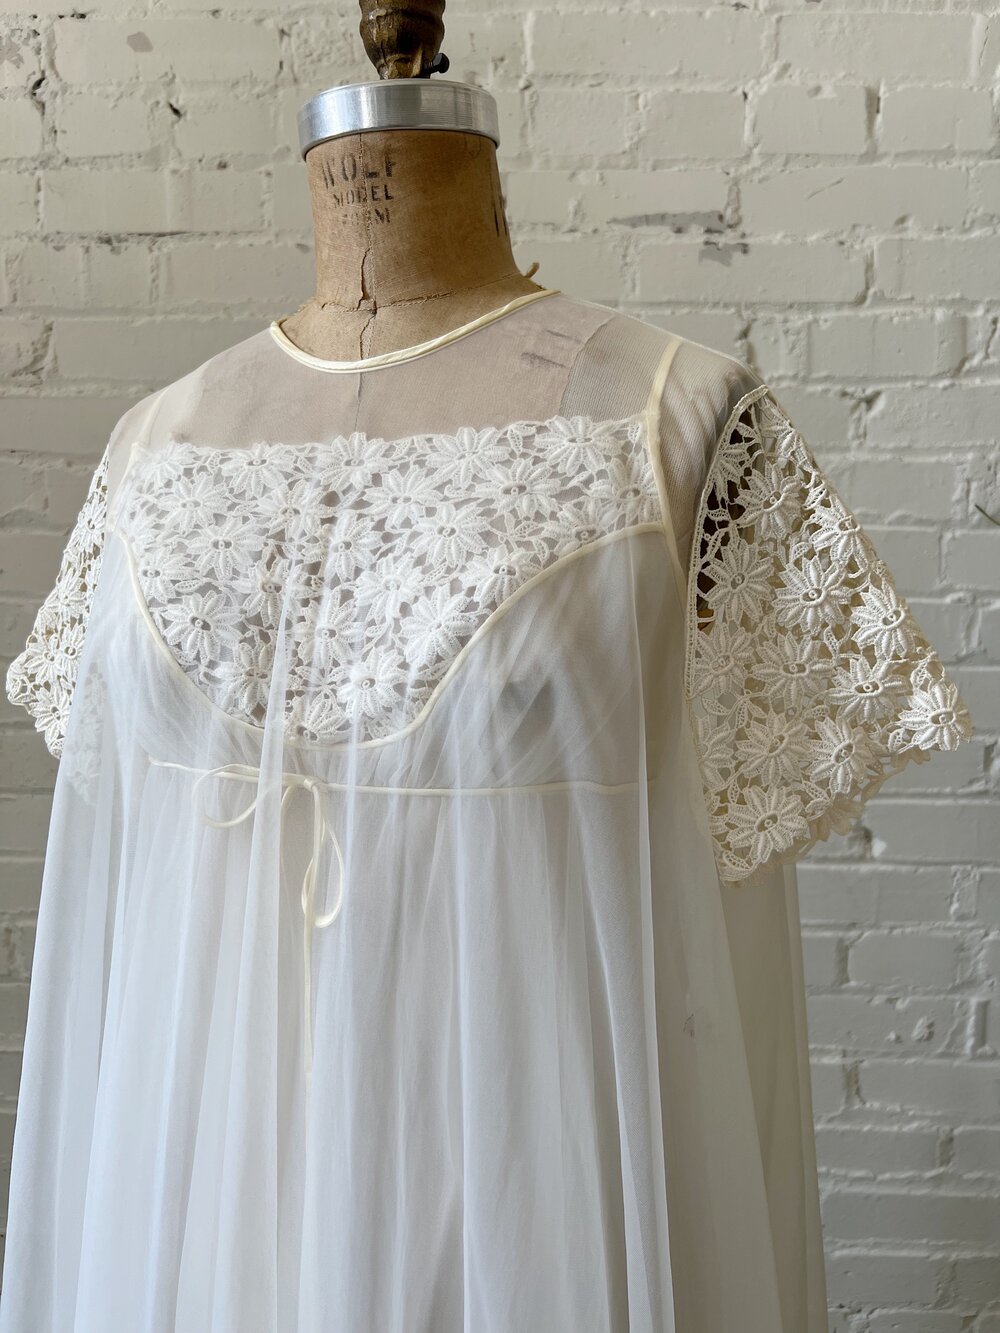 Sheer Nightgown & Overlay Gown w/Lace Sleeves Peignoir Set